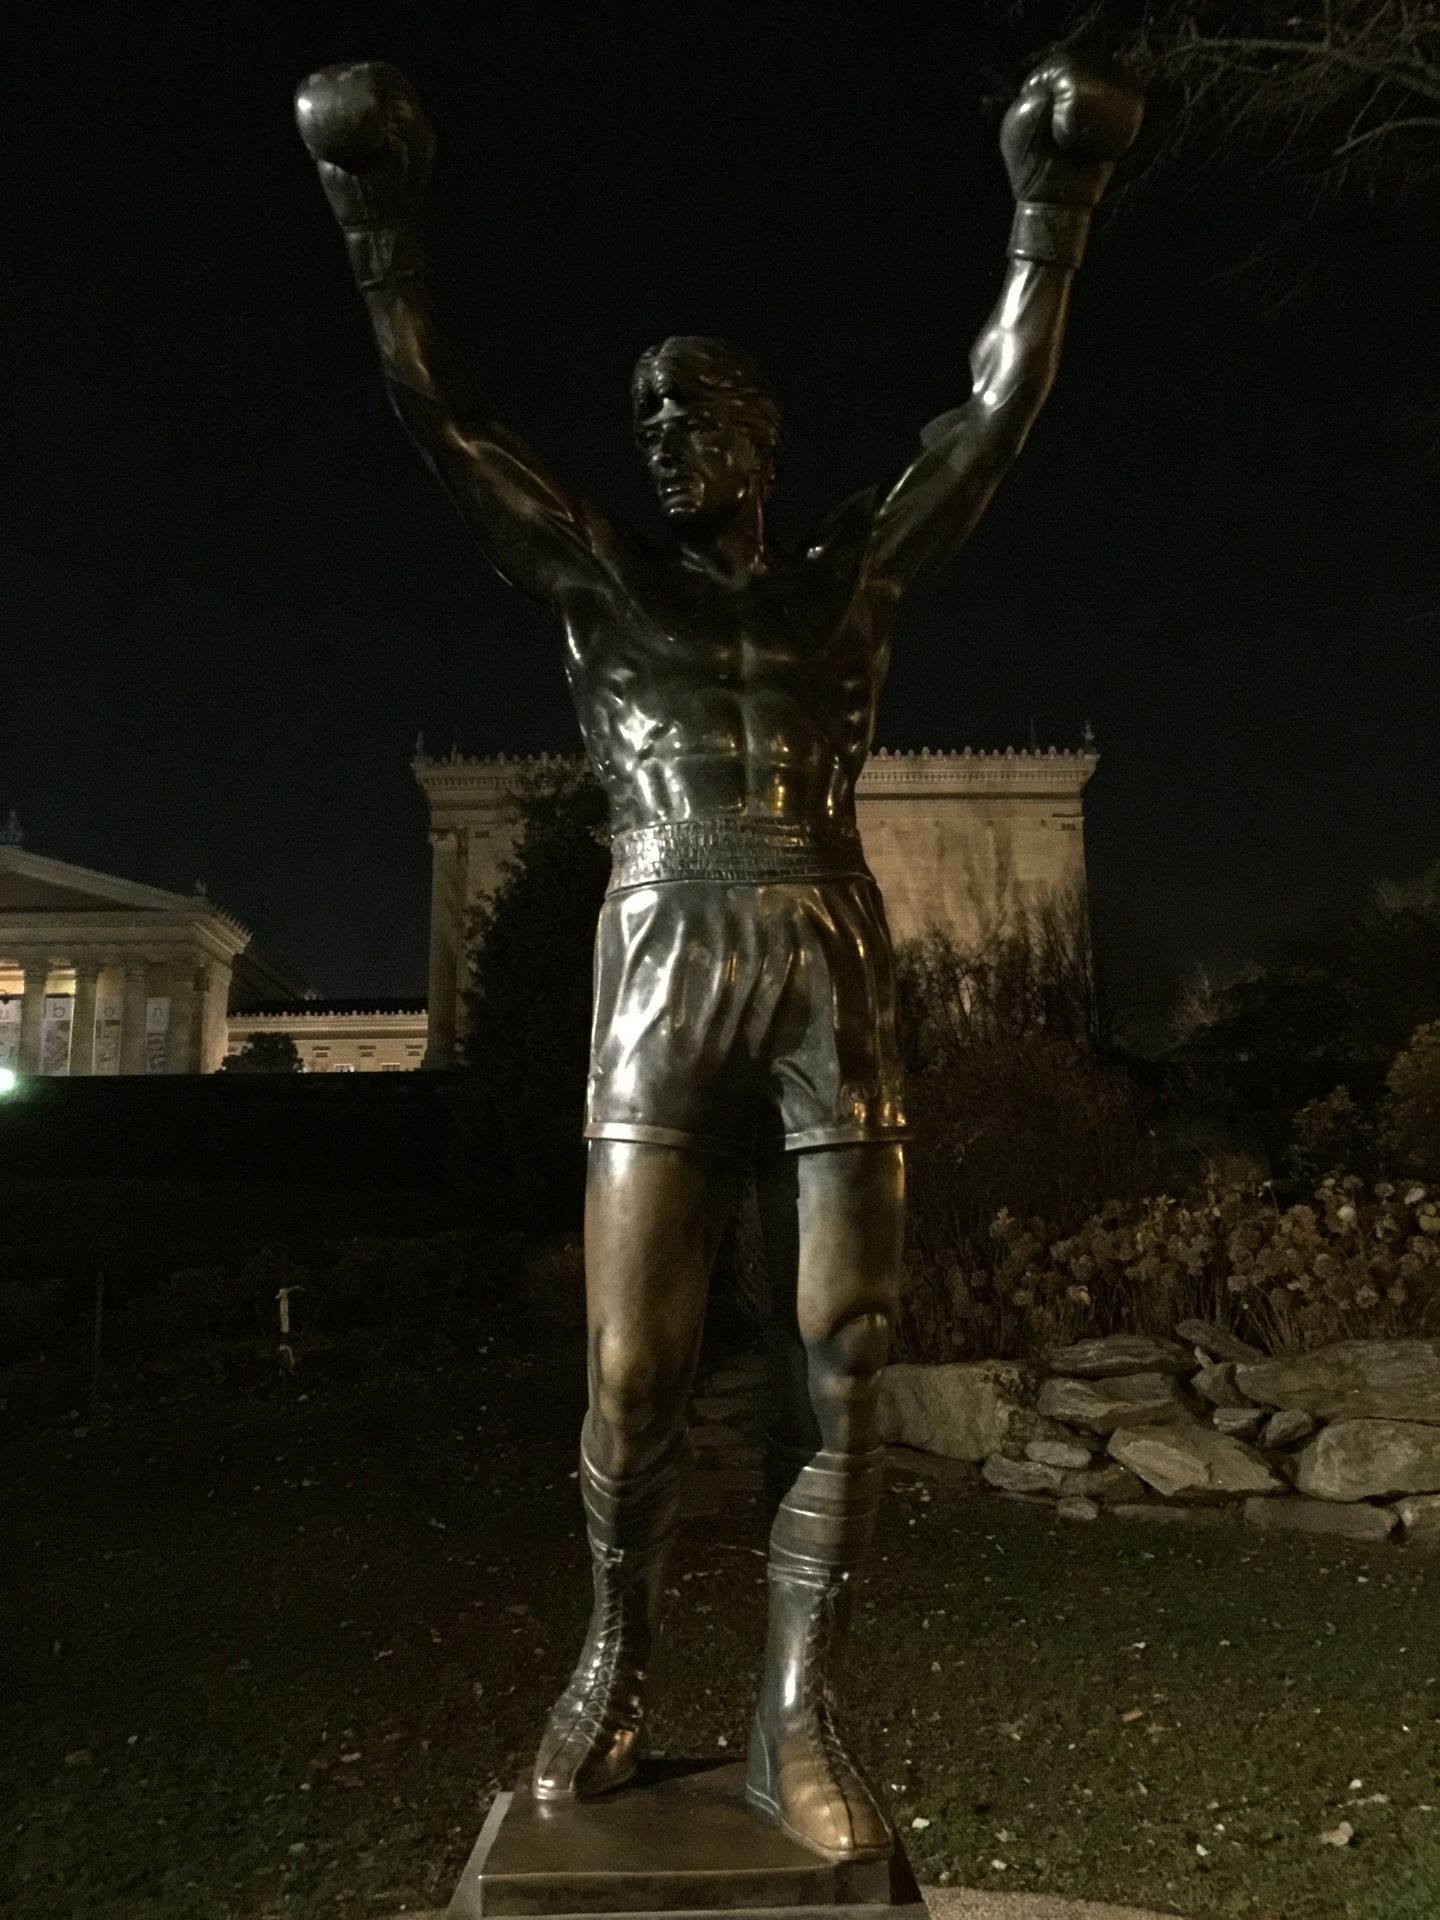 Checked in at Rocky Statue